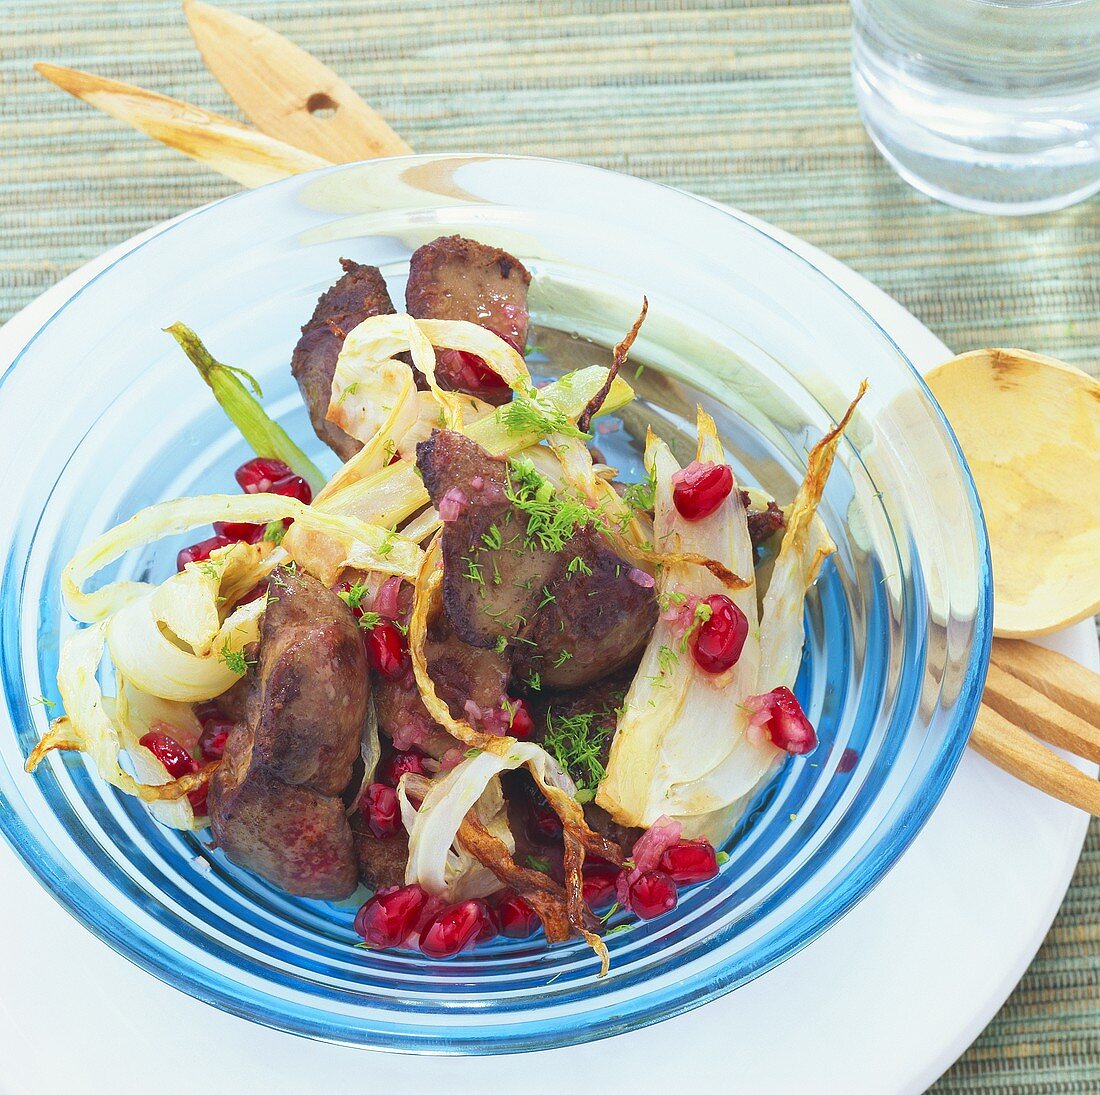 Chicken liver with pomegranate seeds and fennel